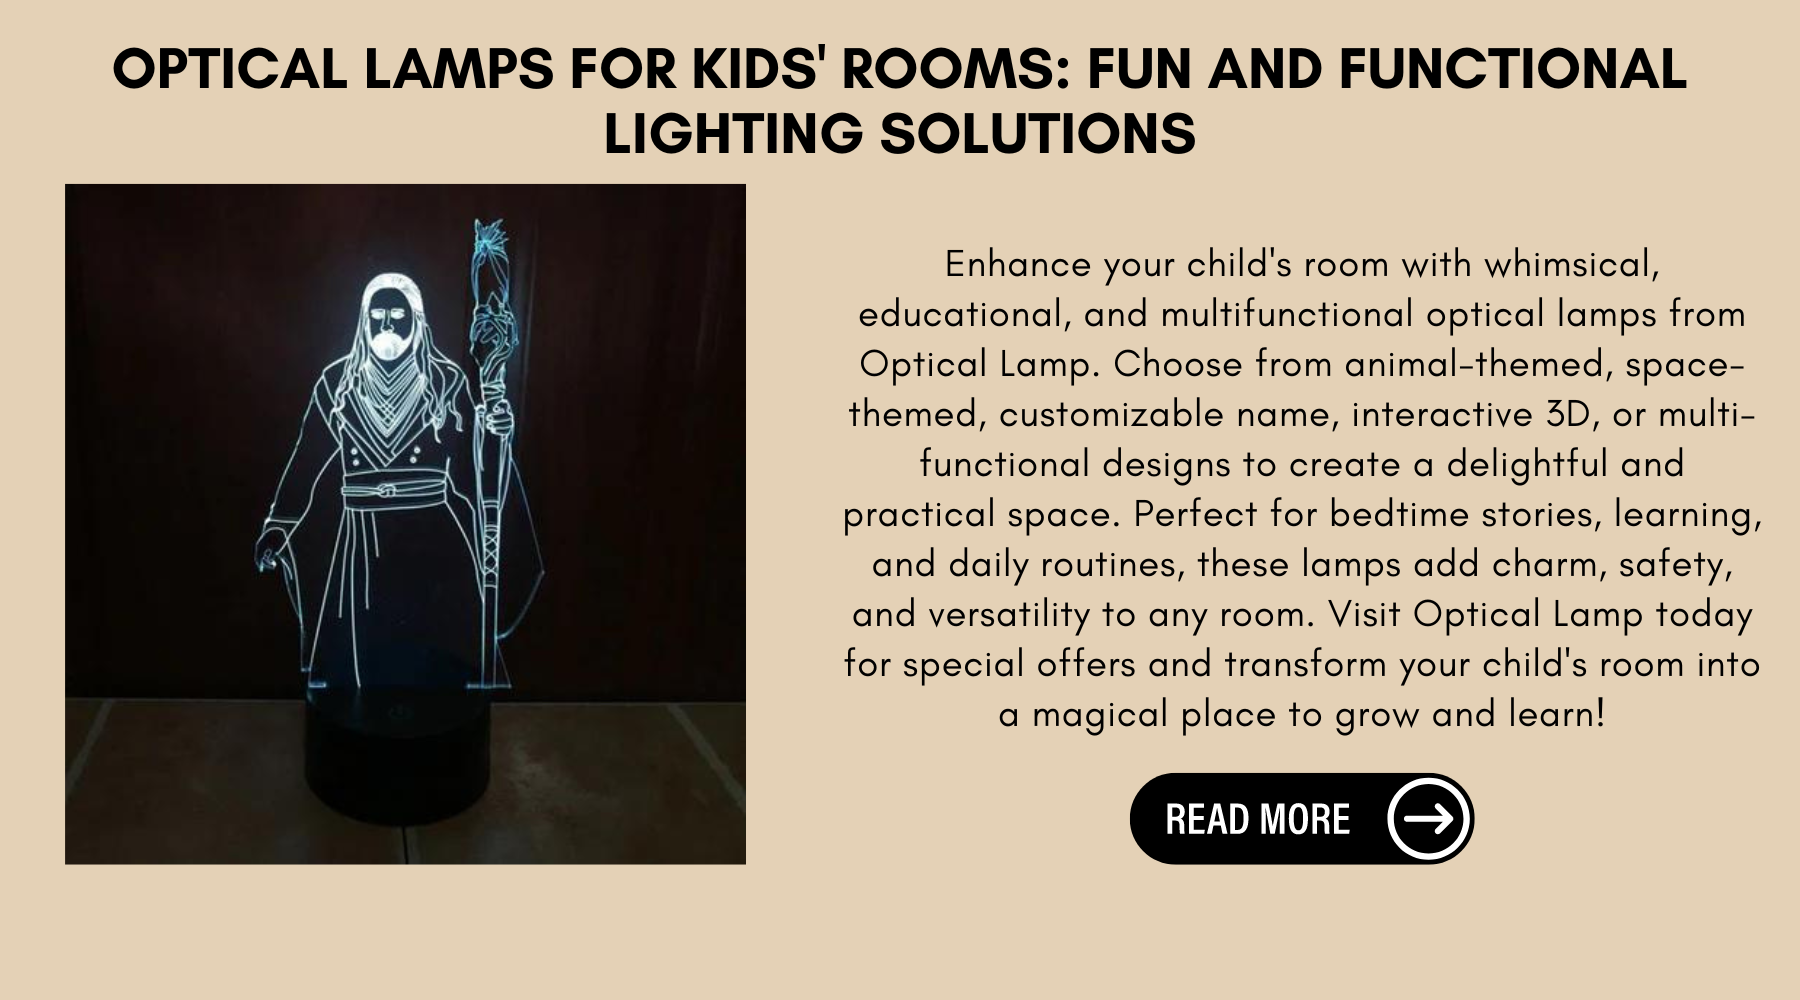 Optical Lamps For Kids' Rooms: Fun And Functional Lighting Solutions